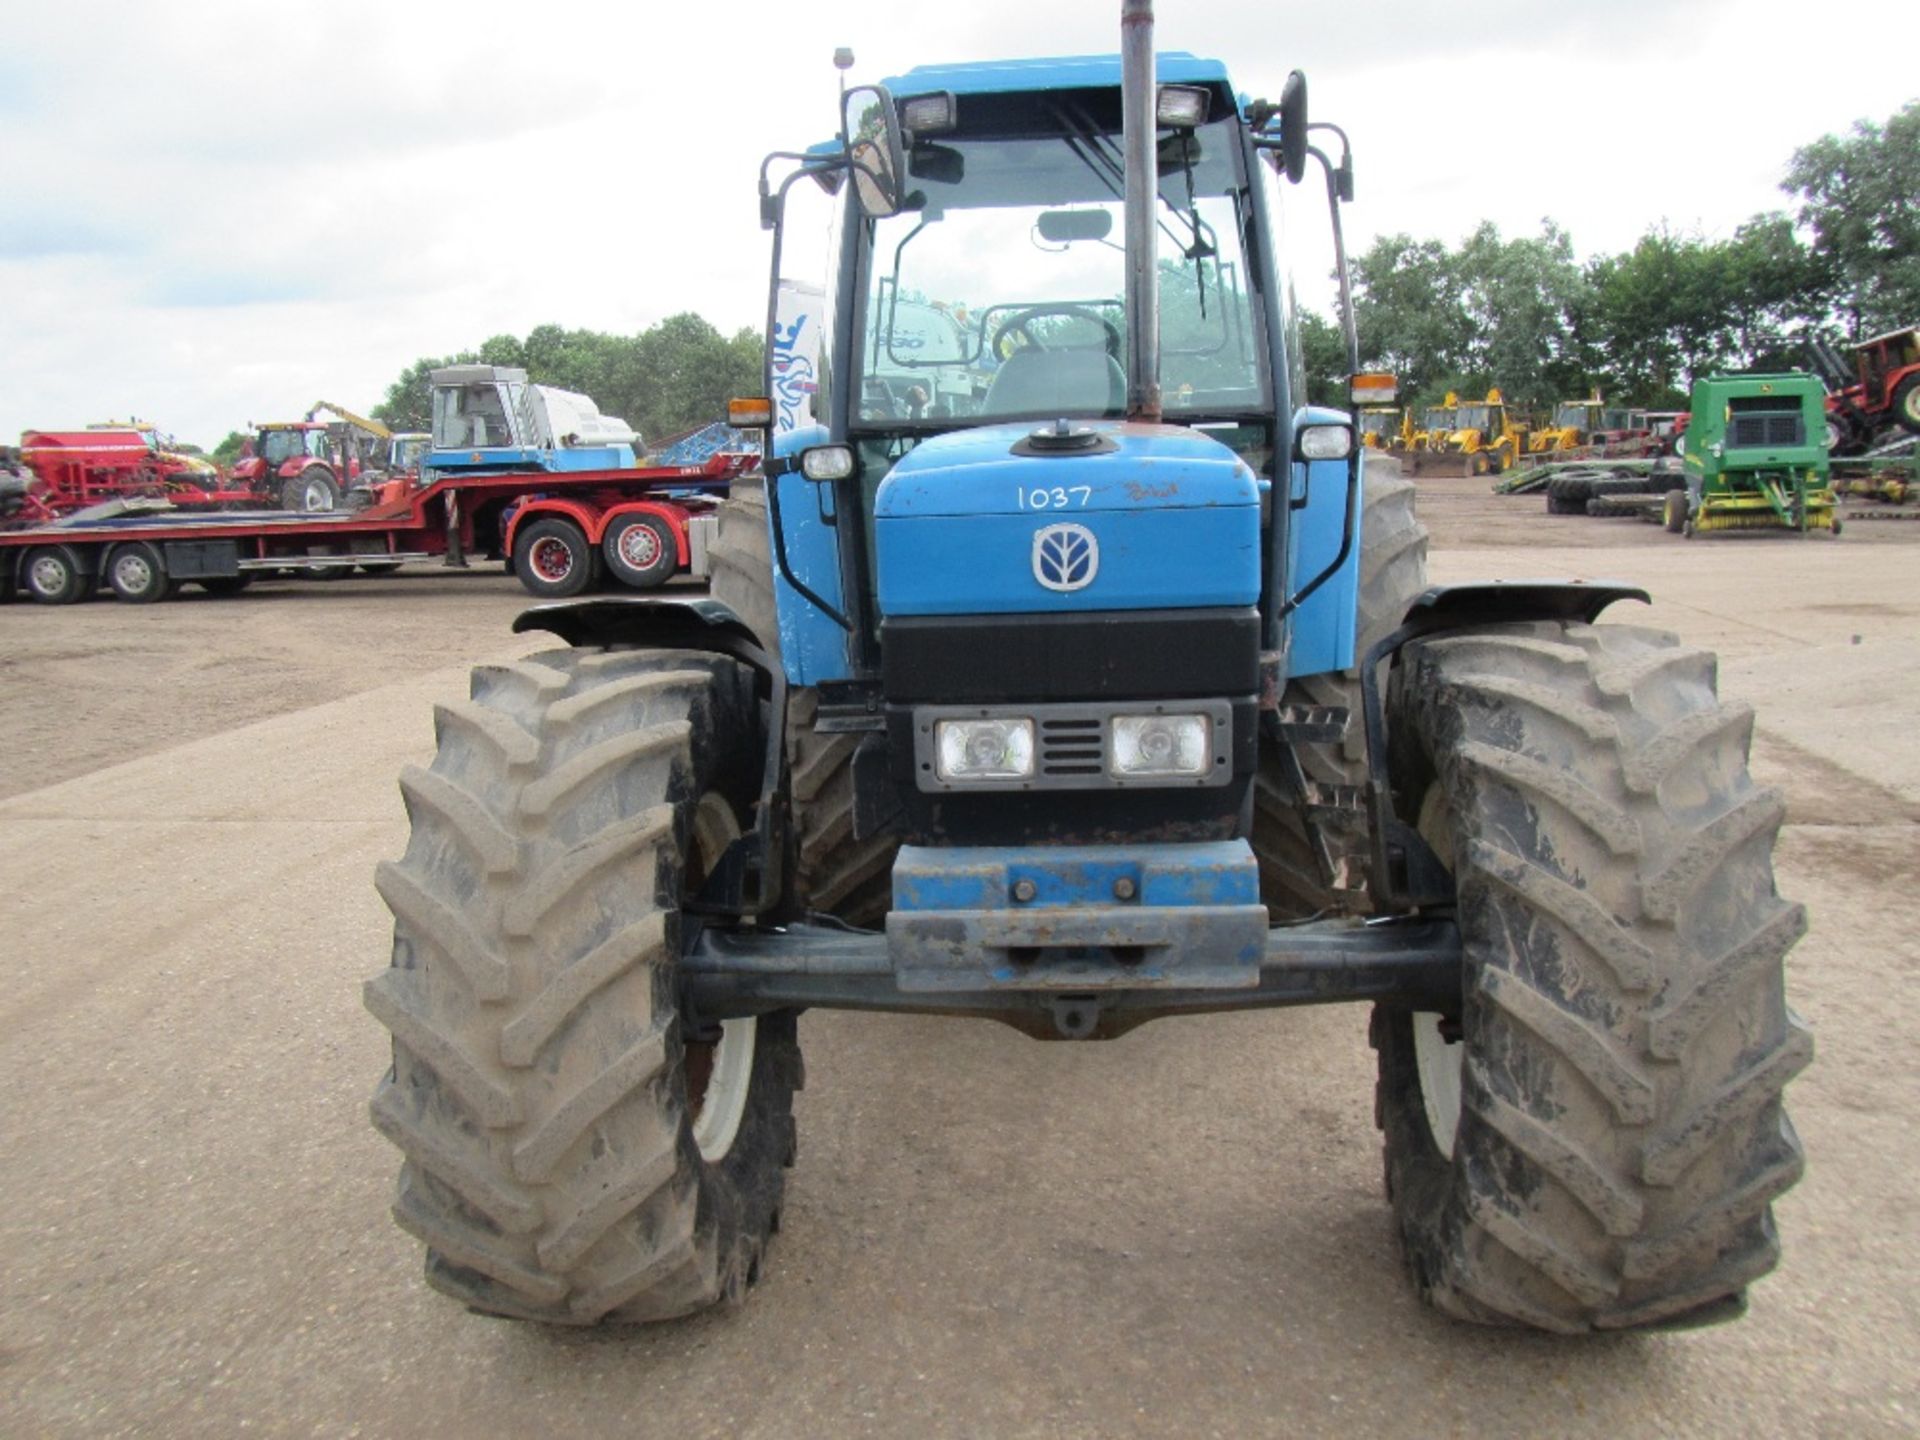 New Holland 8340 SLE 4wd Tractor. Reg. No. N243 SCN Ser. No. 025324B - Image 2 of 20